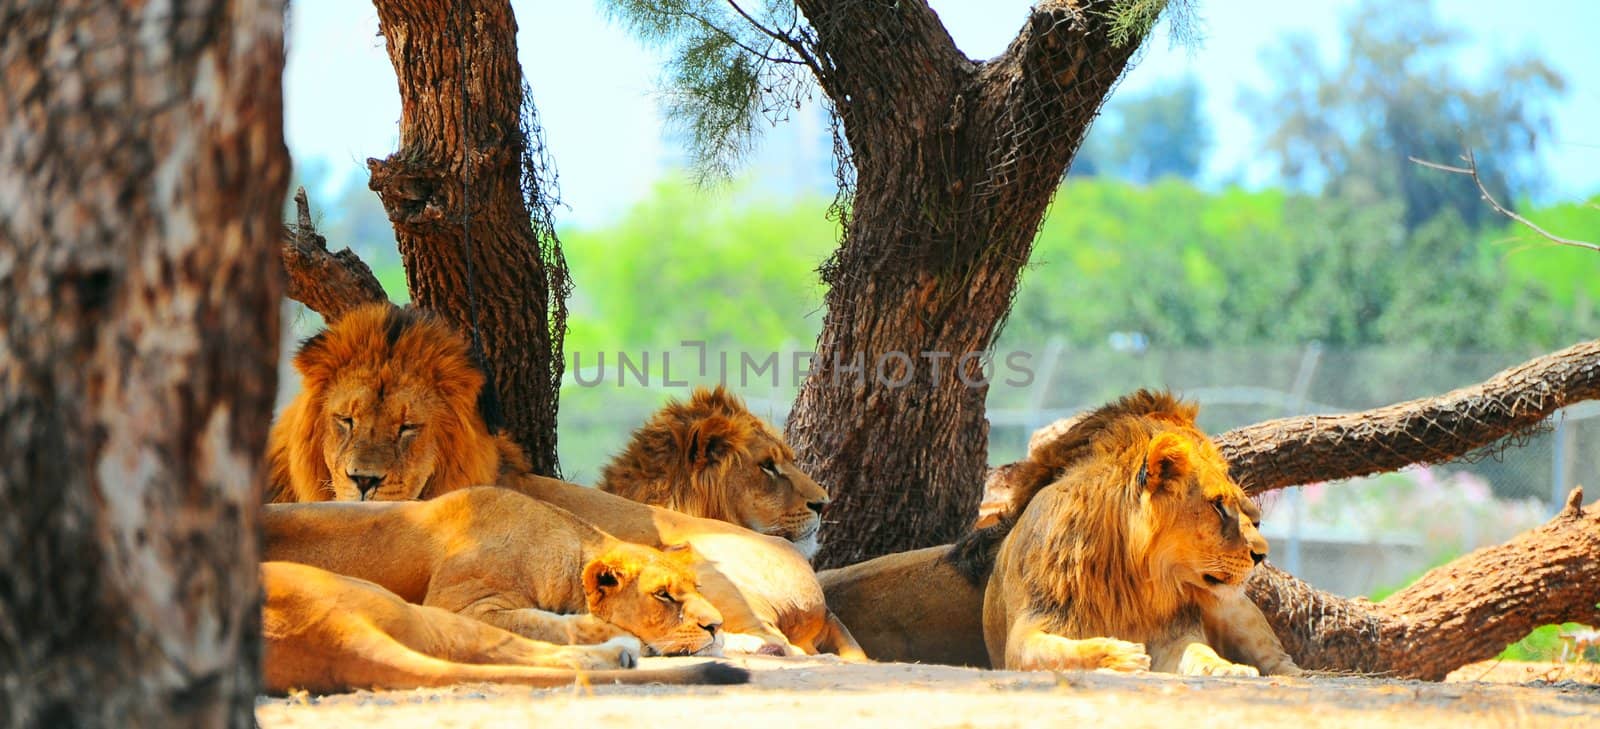 Lions by gkuna